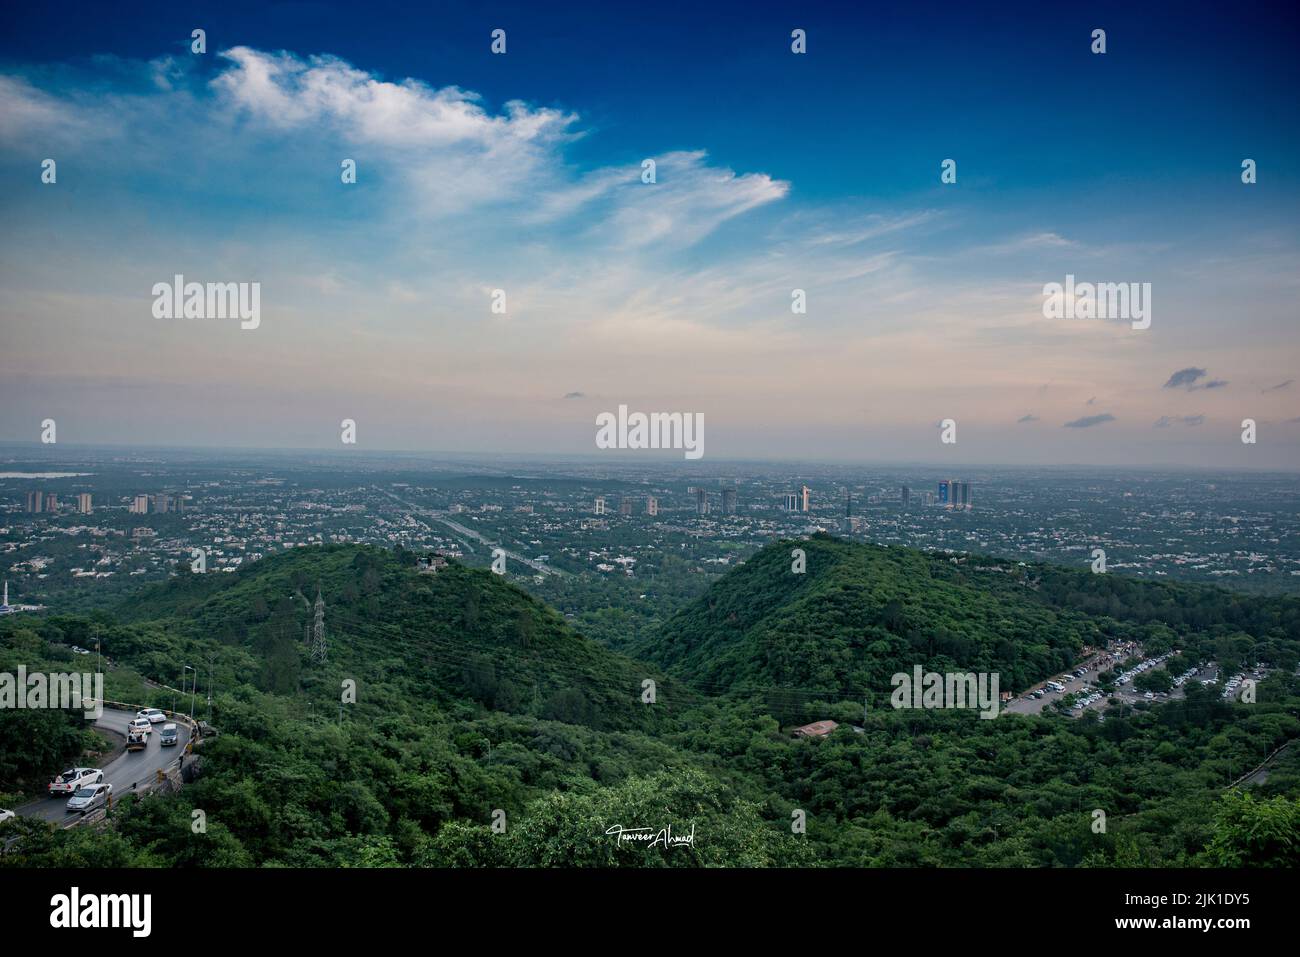 City view of Islamabad Pakistan from mountains of Margala. Stock Photo